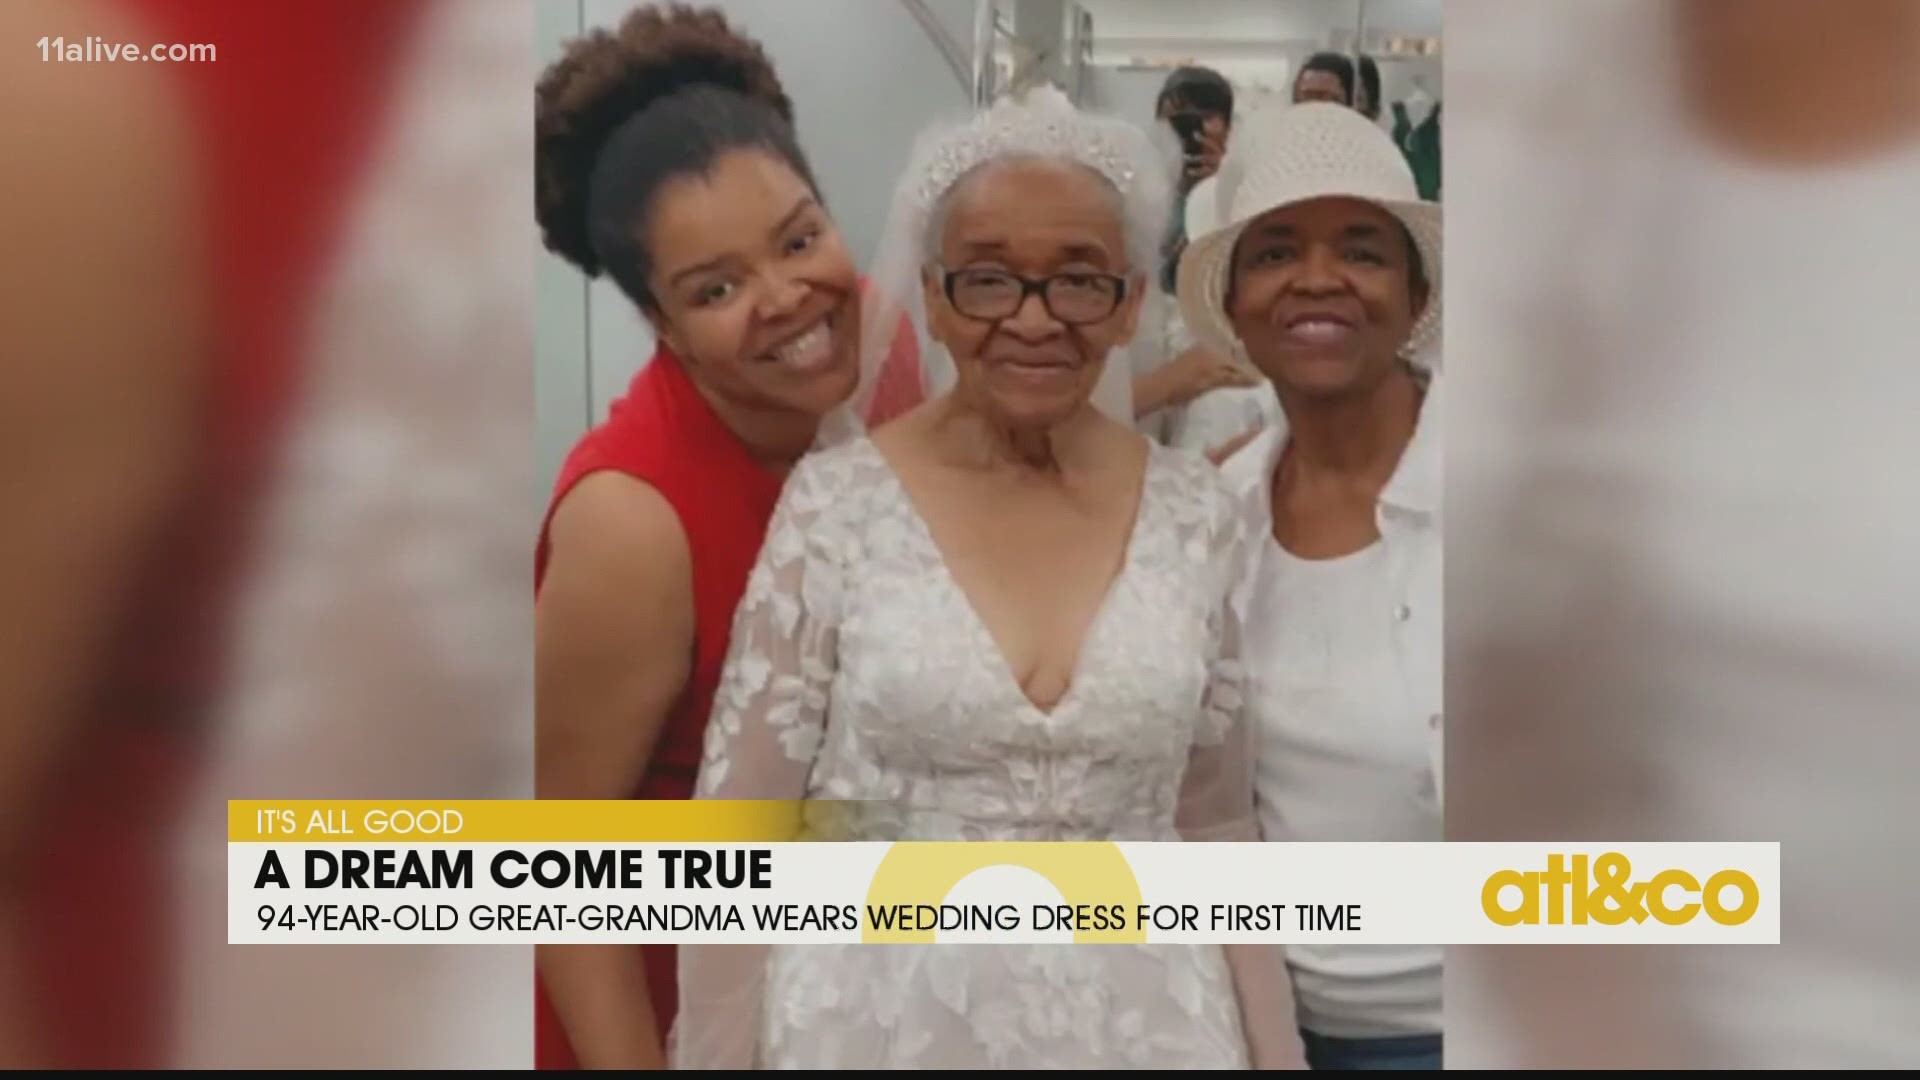 This beloved 94-year-old great-grandma got to finally try on a wedding dress nearly 70 years after her wedding ceremony.